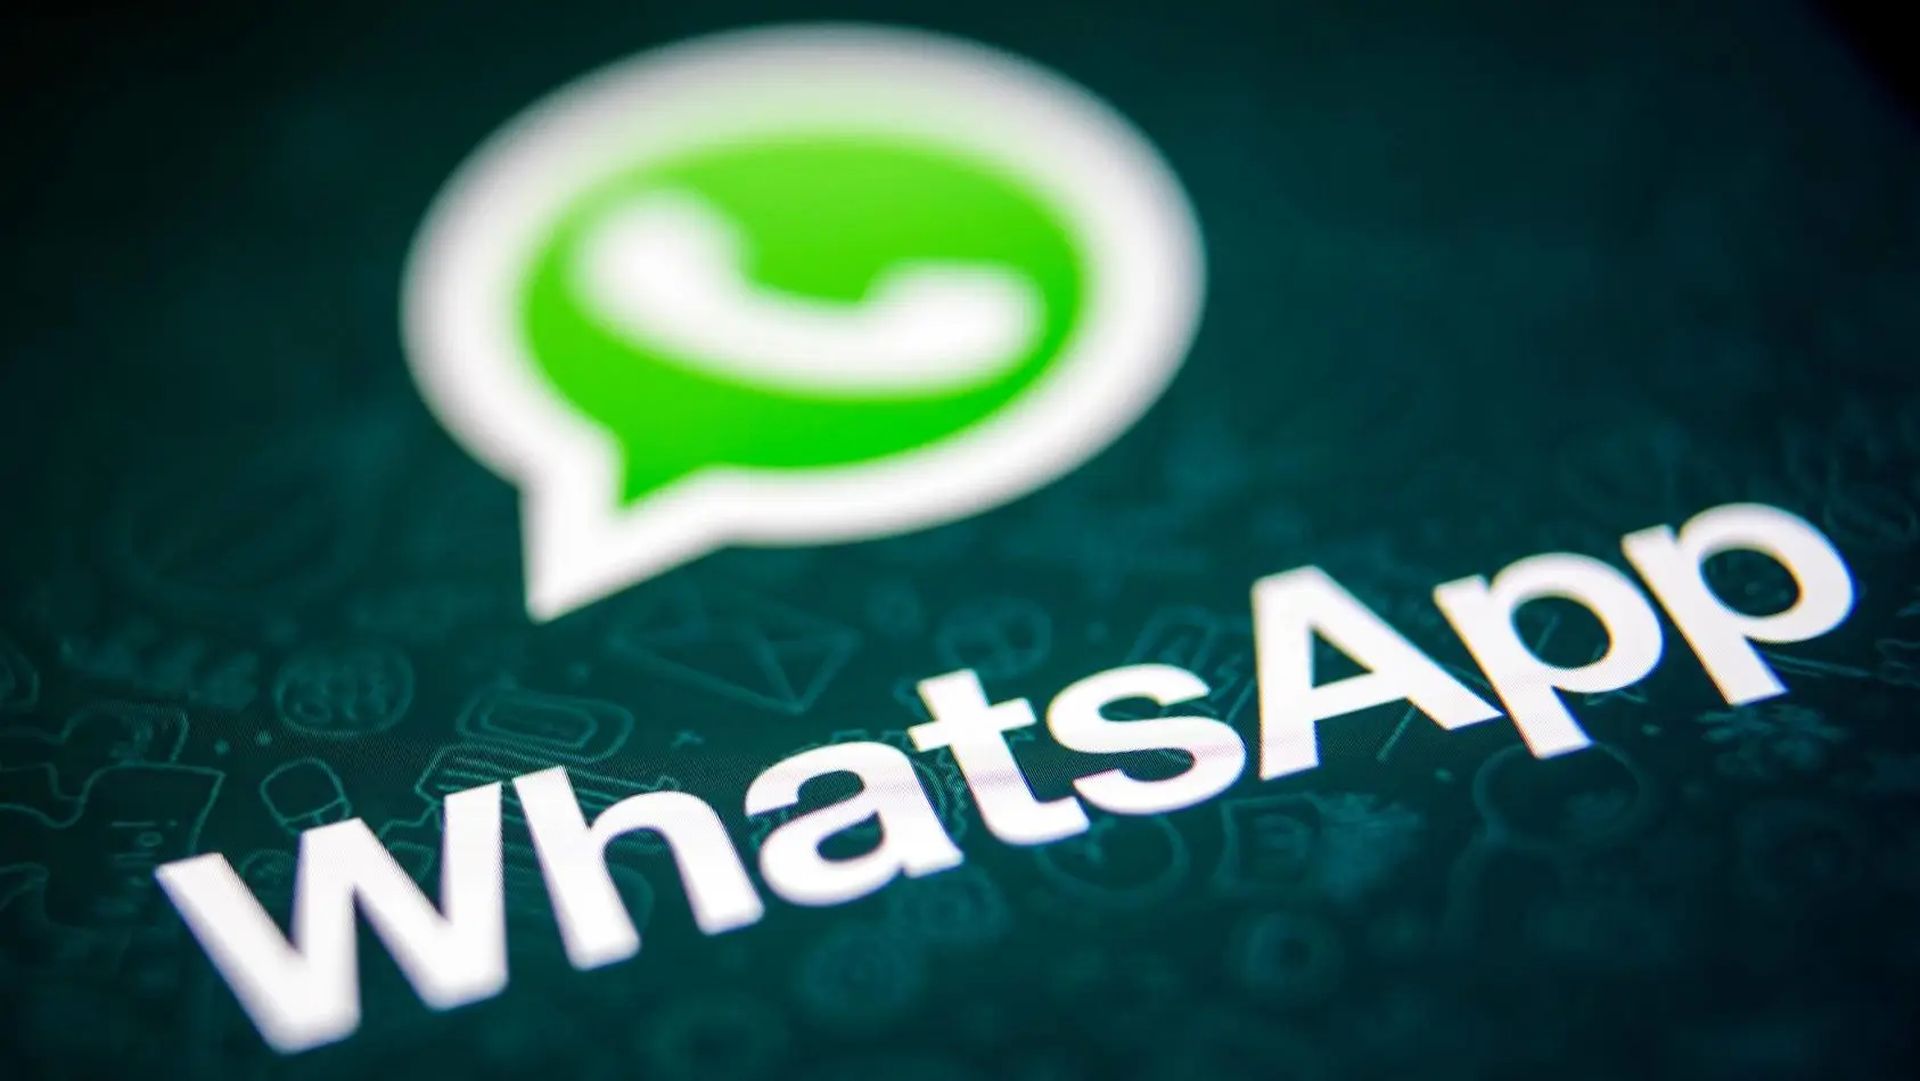 In this article, we are going to be covering WhatsApp not working: How to fix WhatsApp messages not sending, so you can keep messaging your friends and loved ones.